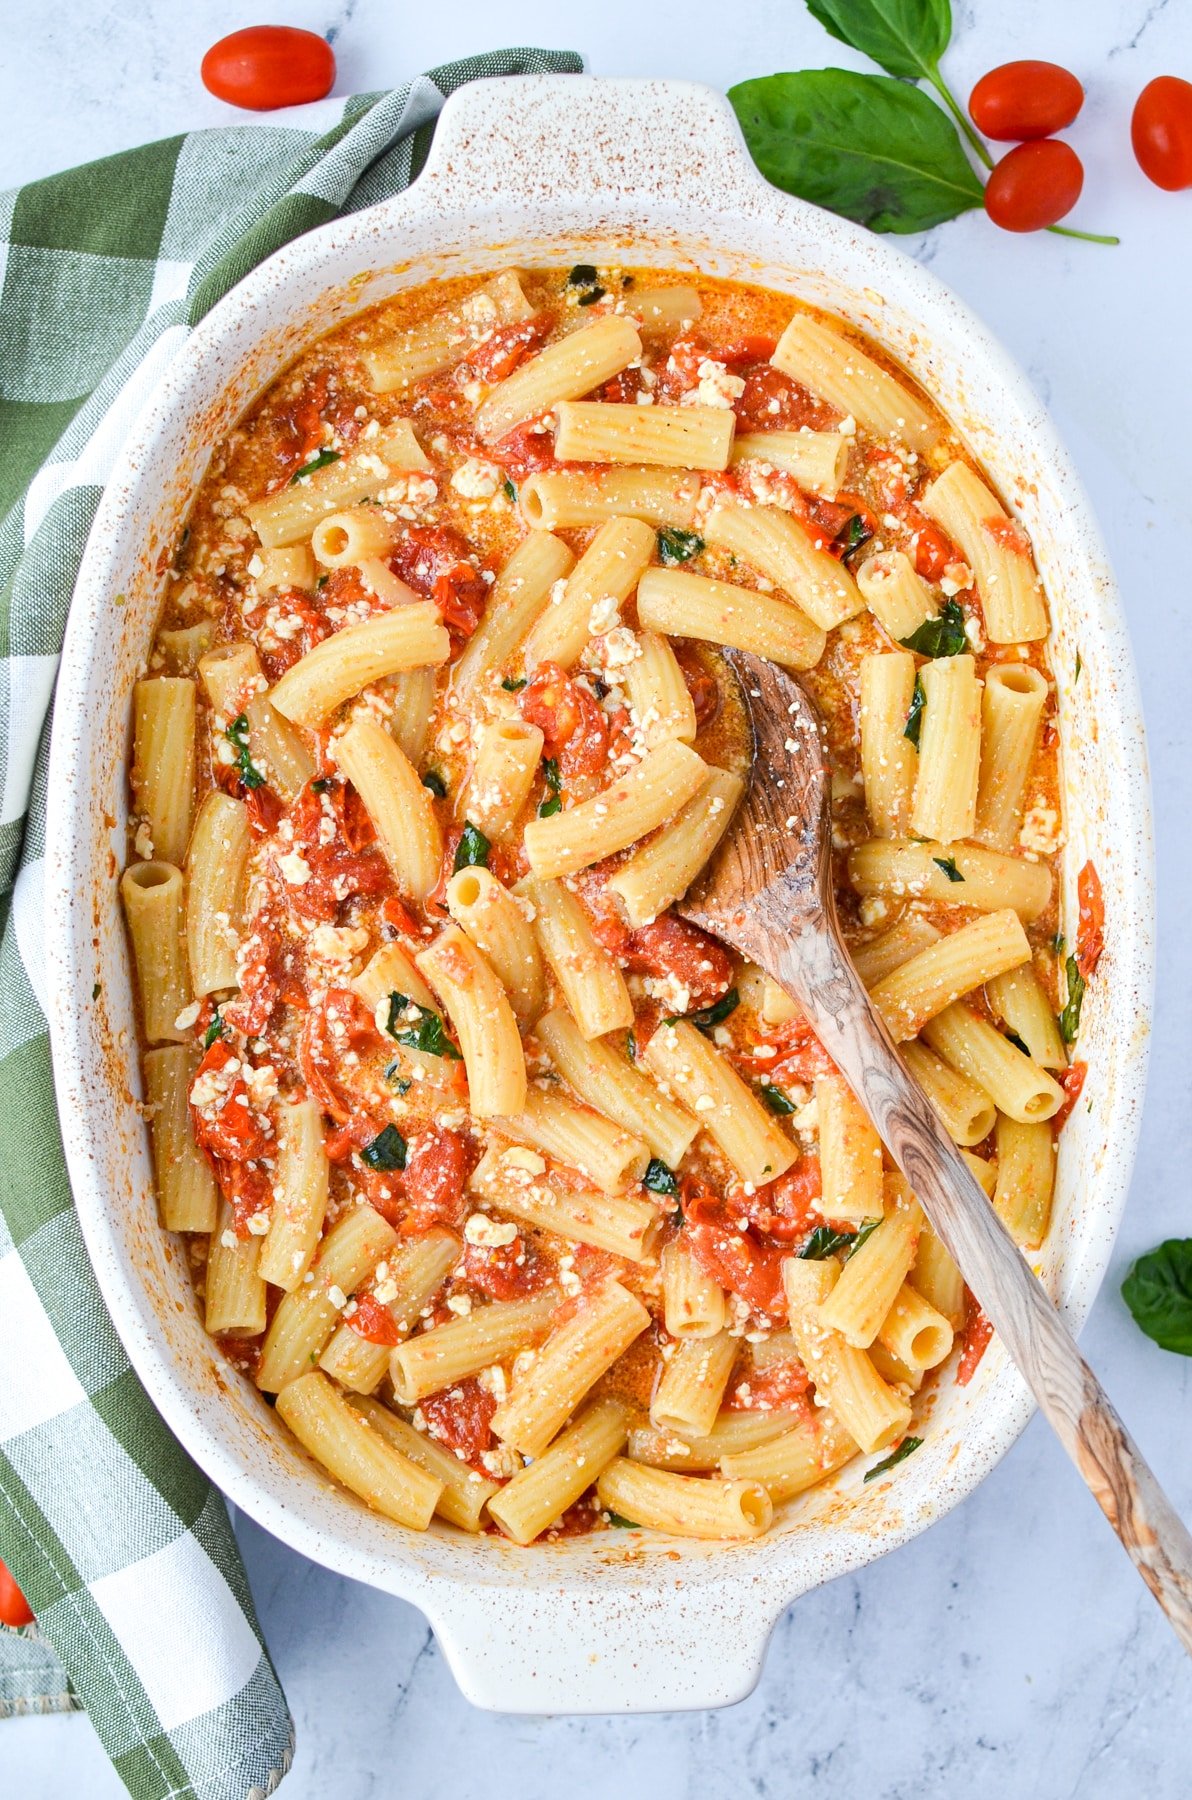 A baking dish with a tomato and pasta dish garnished with basil.